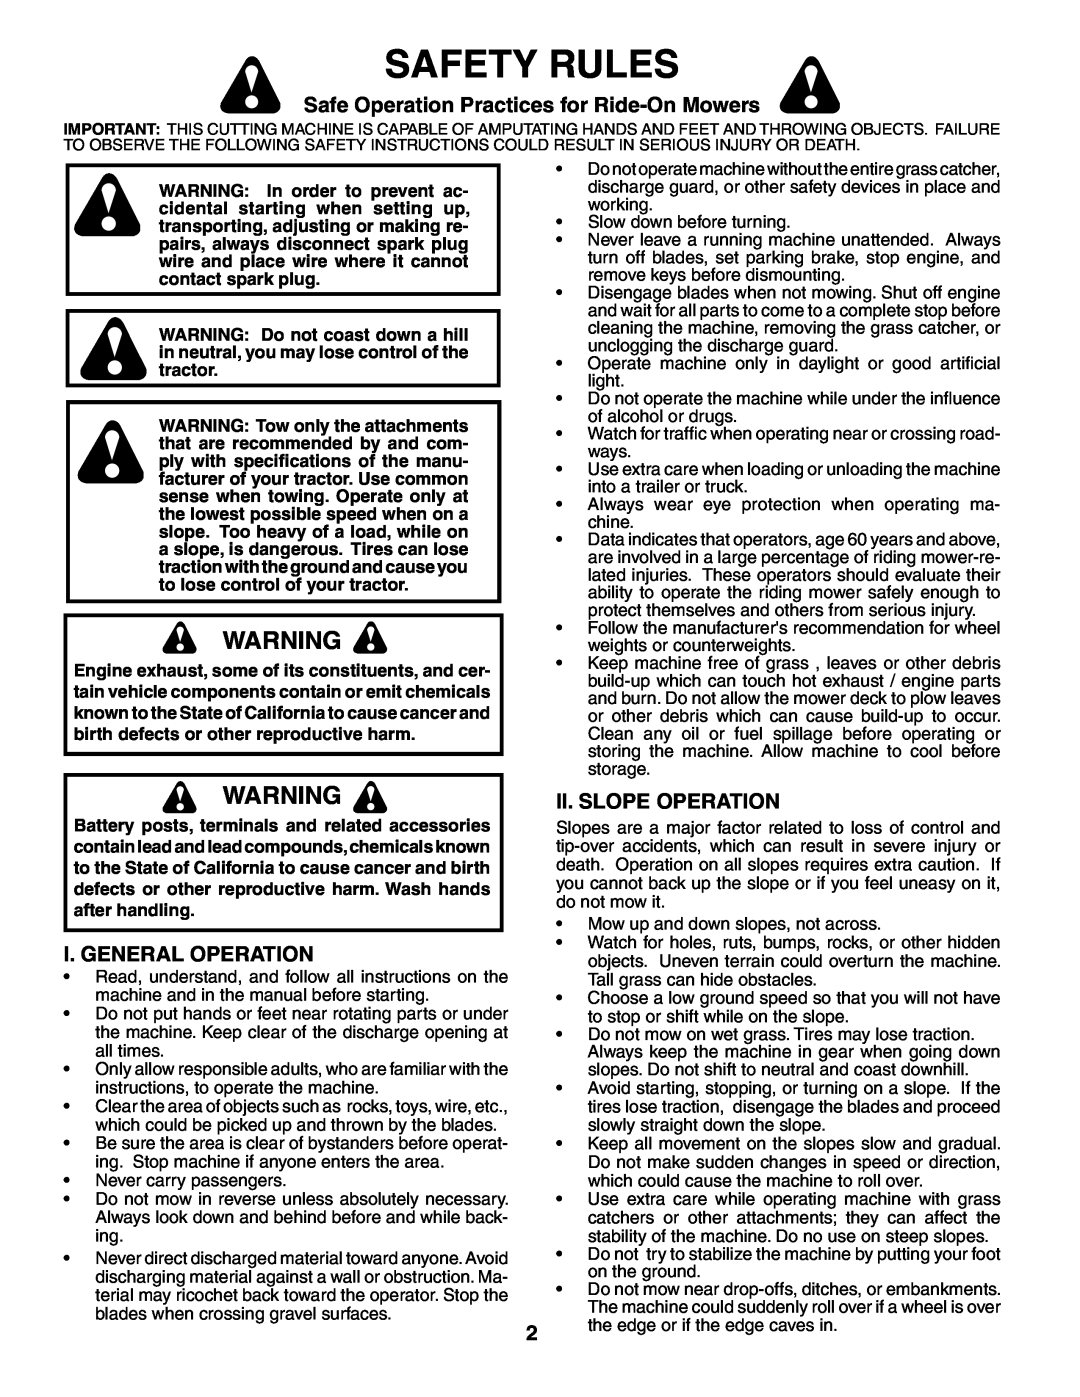 Poulan PD24PH42ST Safety Rules, Safe Operation Practices for Ride-OnMowers, I. General Operation, Ii. Slope Operation 